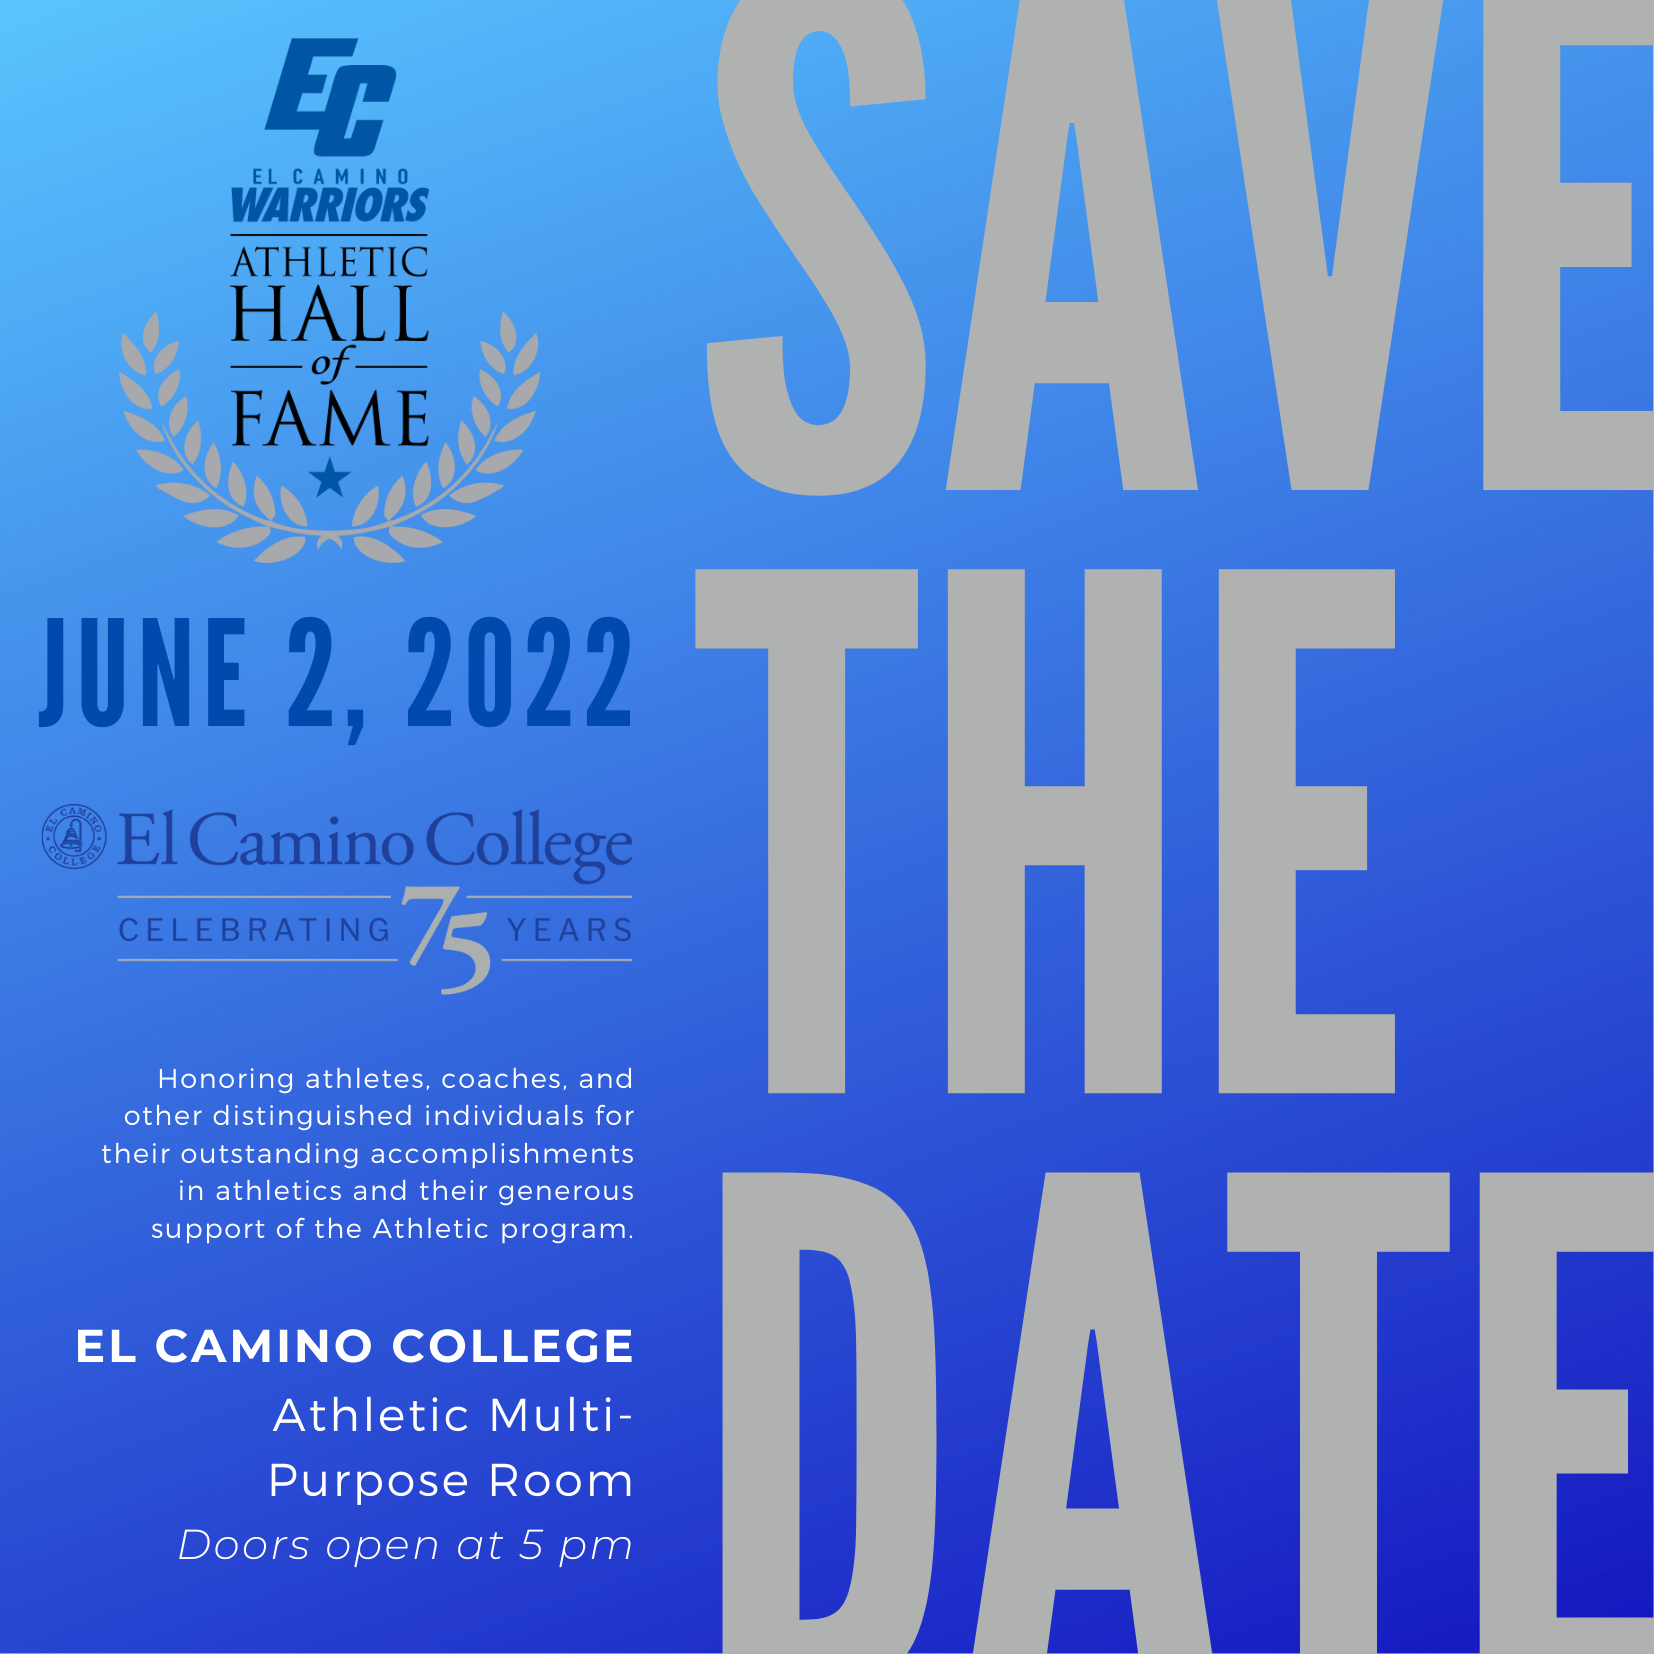 El Camino College Hall of Fame Committee Announces Class of 2022